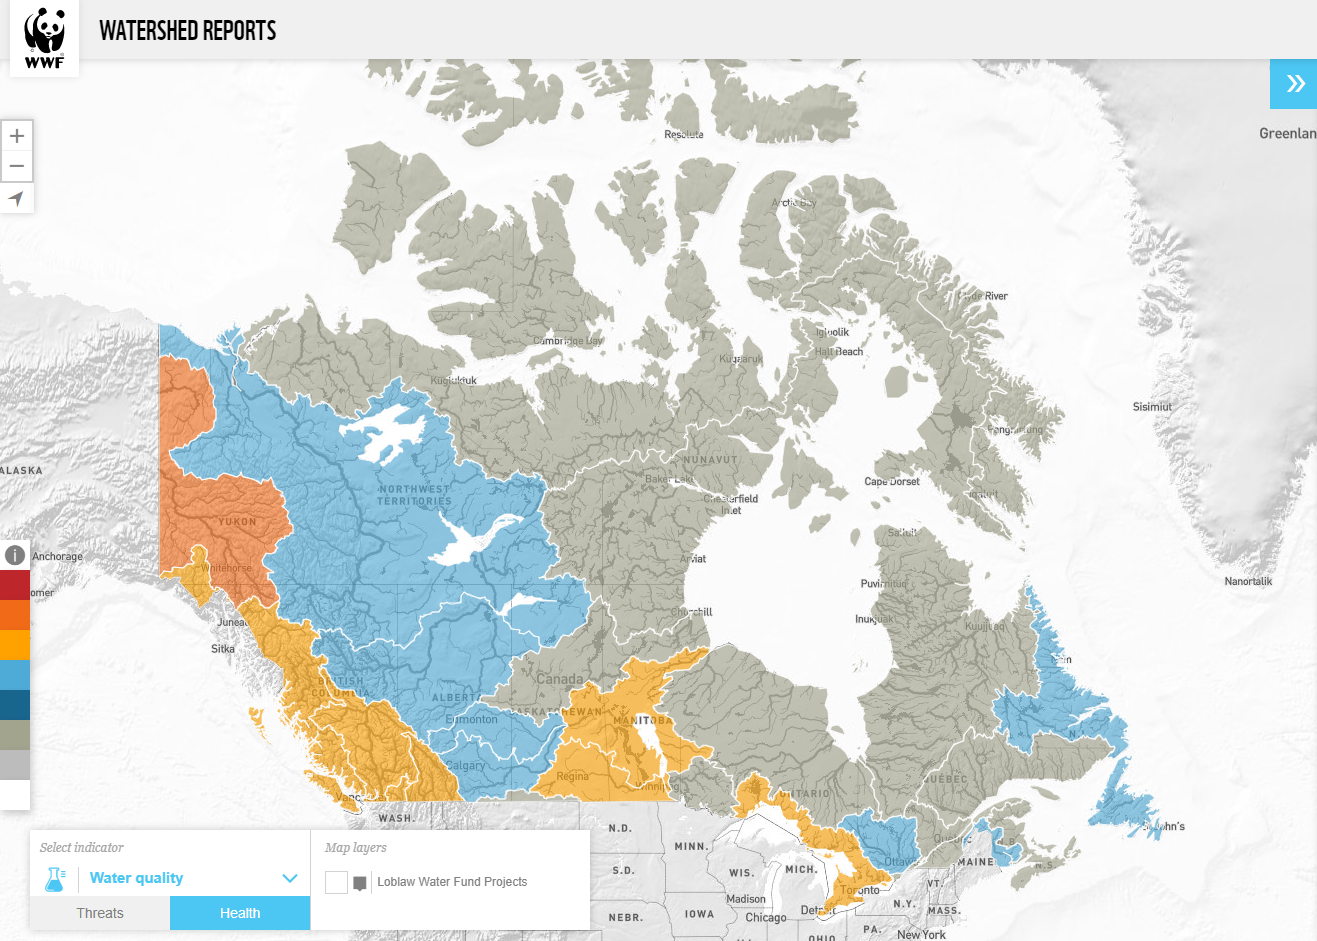 A map of Canada's water quality from WWF-Canada's Watershed reports.